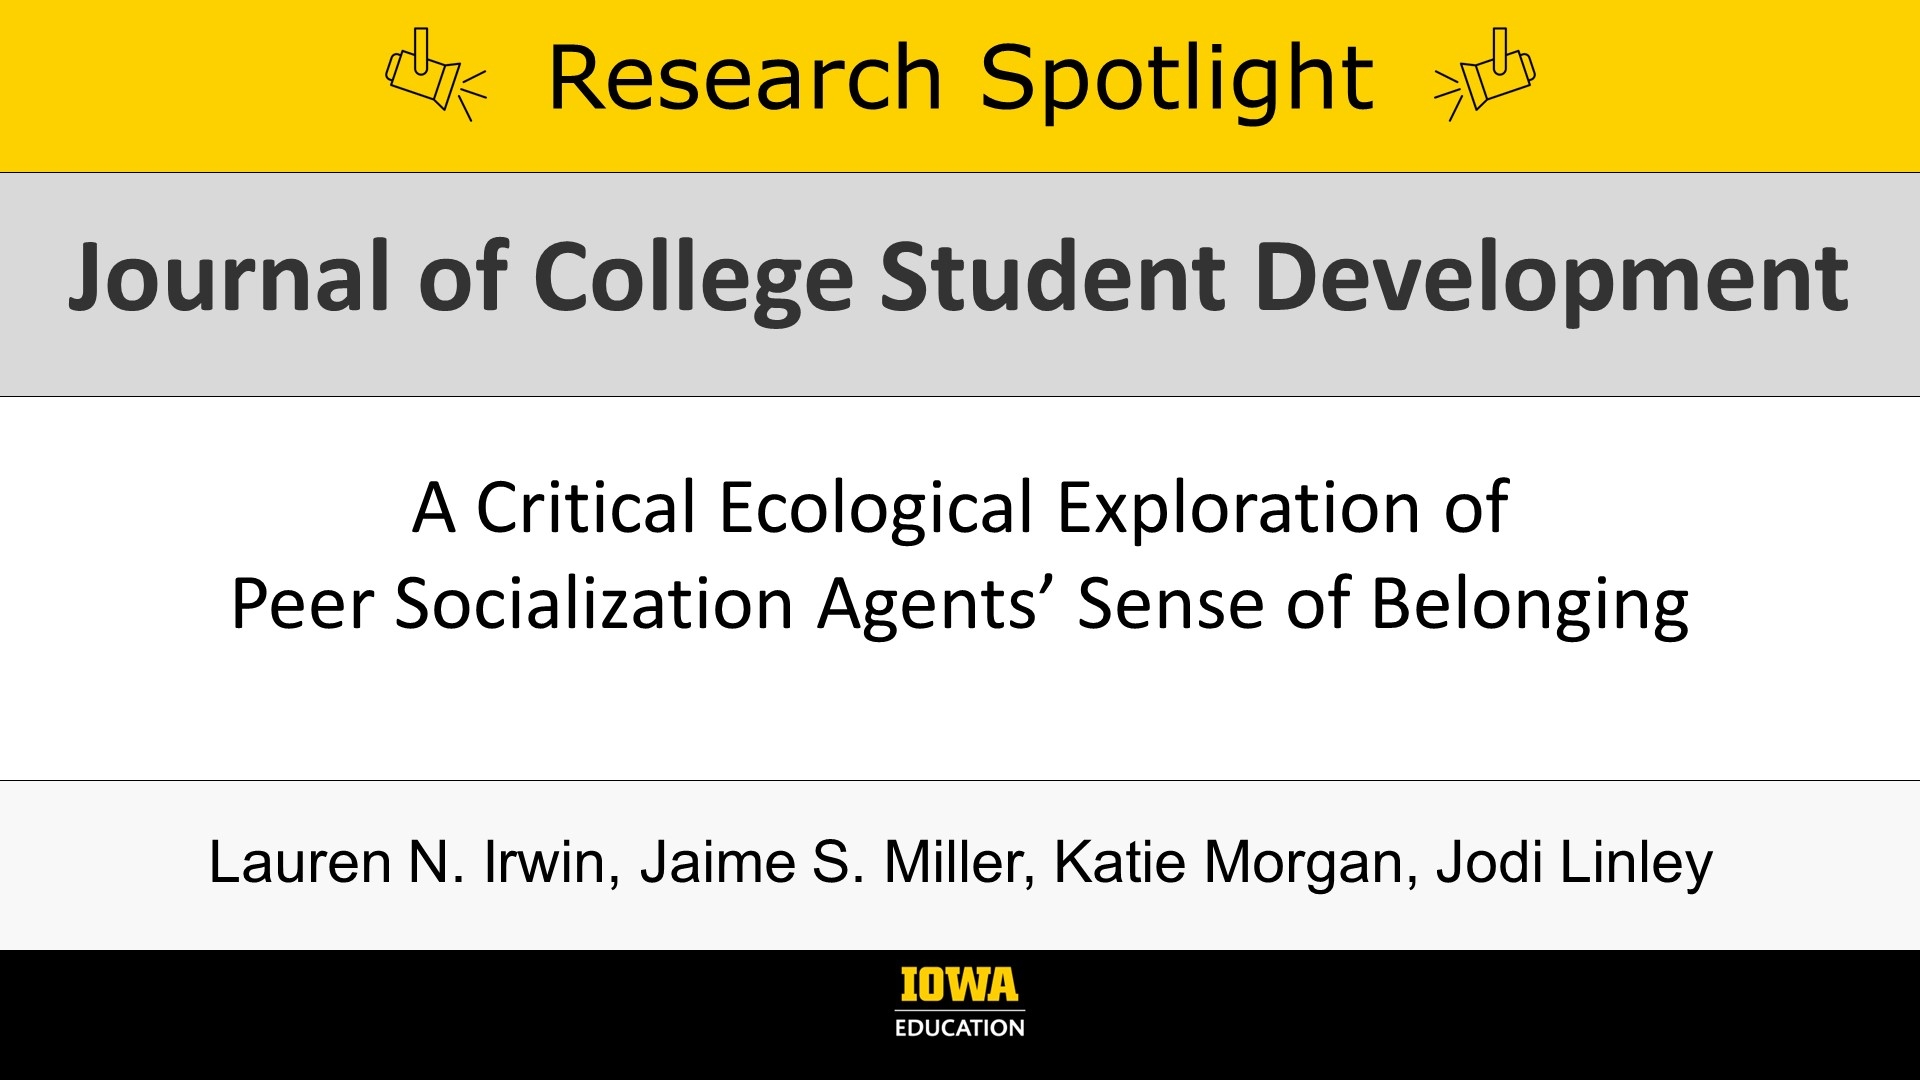 Research A Critical Ecological Exploration of Peer Socialization Agents’ Sense of Belonging. In Journal of College Student Development